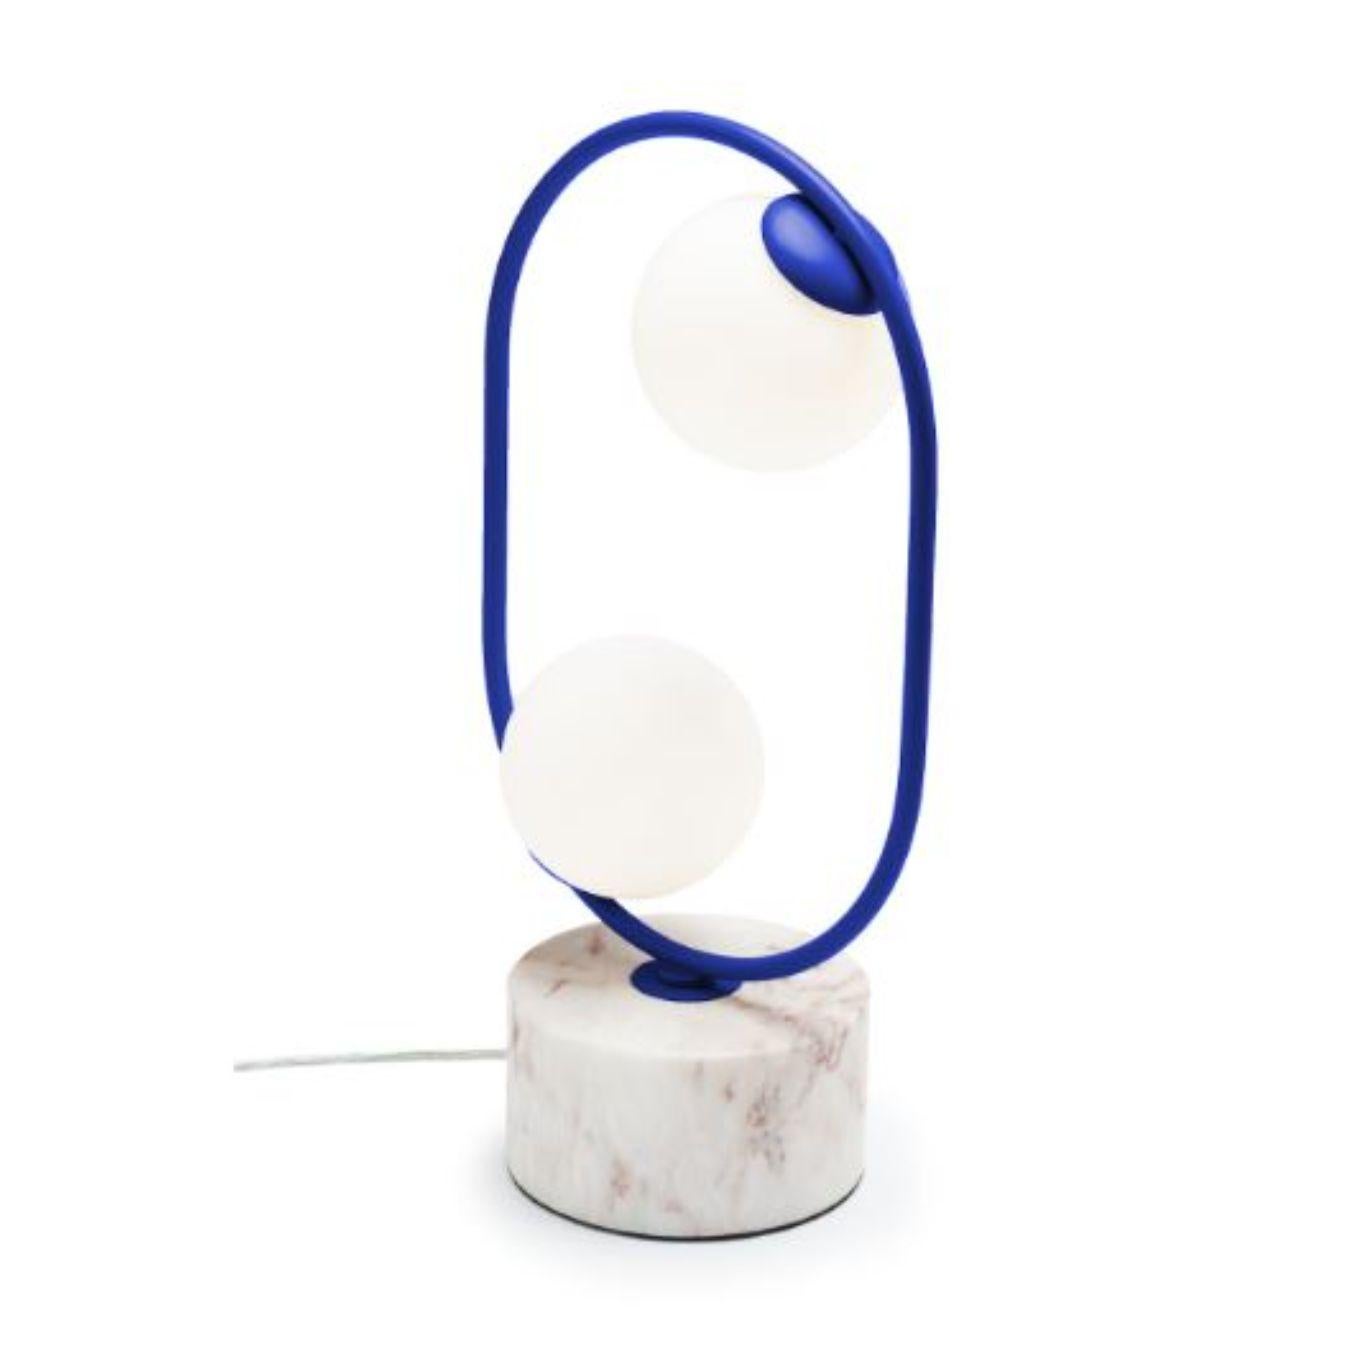 Cobalt Loop table I lamp with Marble Base by Dooq
Dimensions: W 30 x D 15 x H 50 cm
Materials: lacquered metal, polished or brushed metal, marble.
Also available in different colors and materials.

Information:
230V/50Hz
2 x max. G9
4W